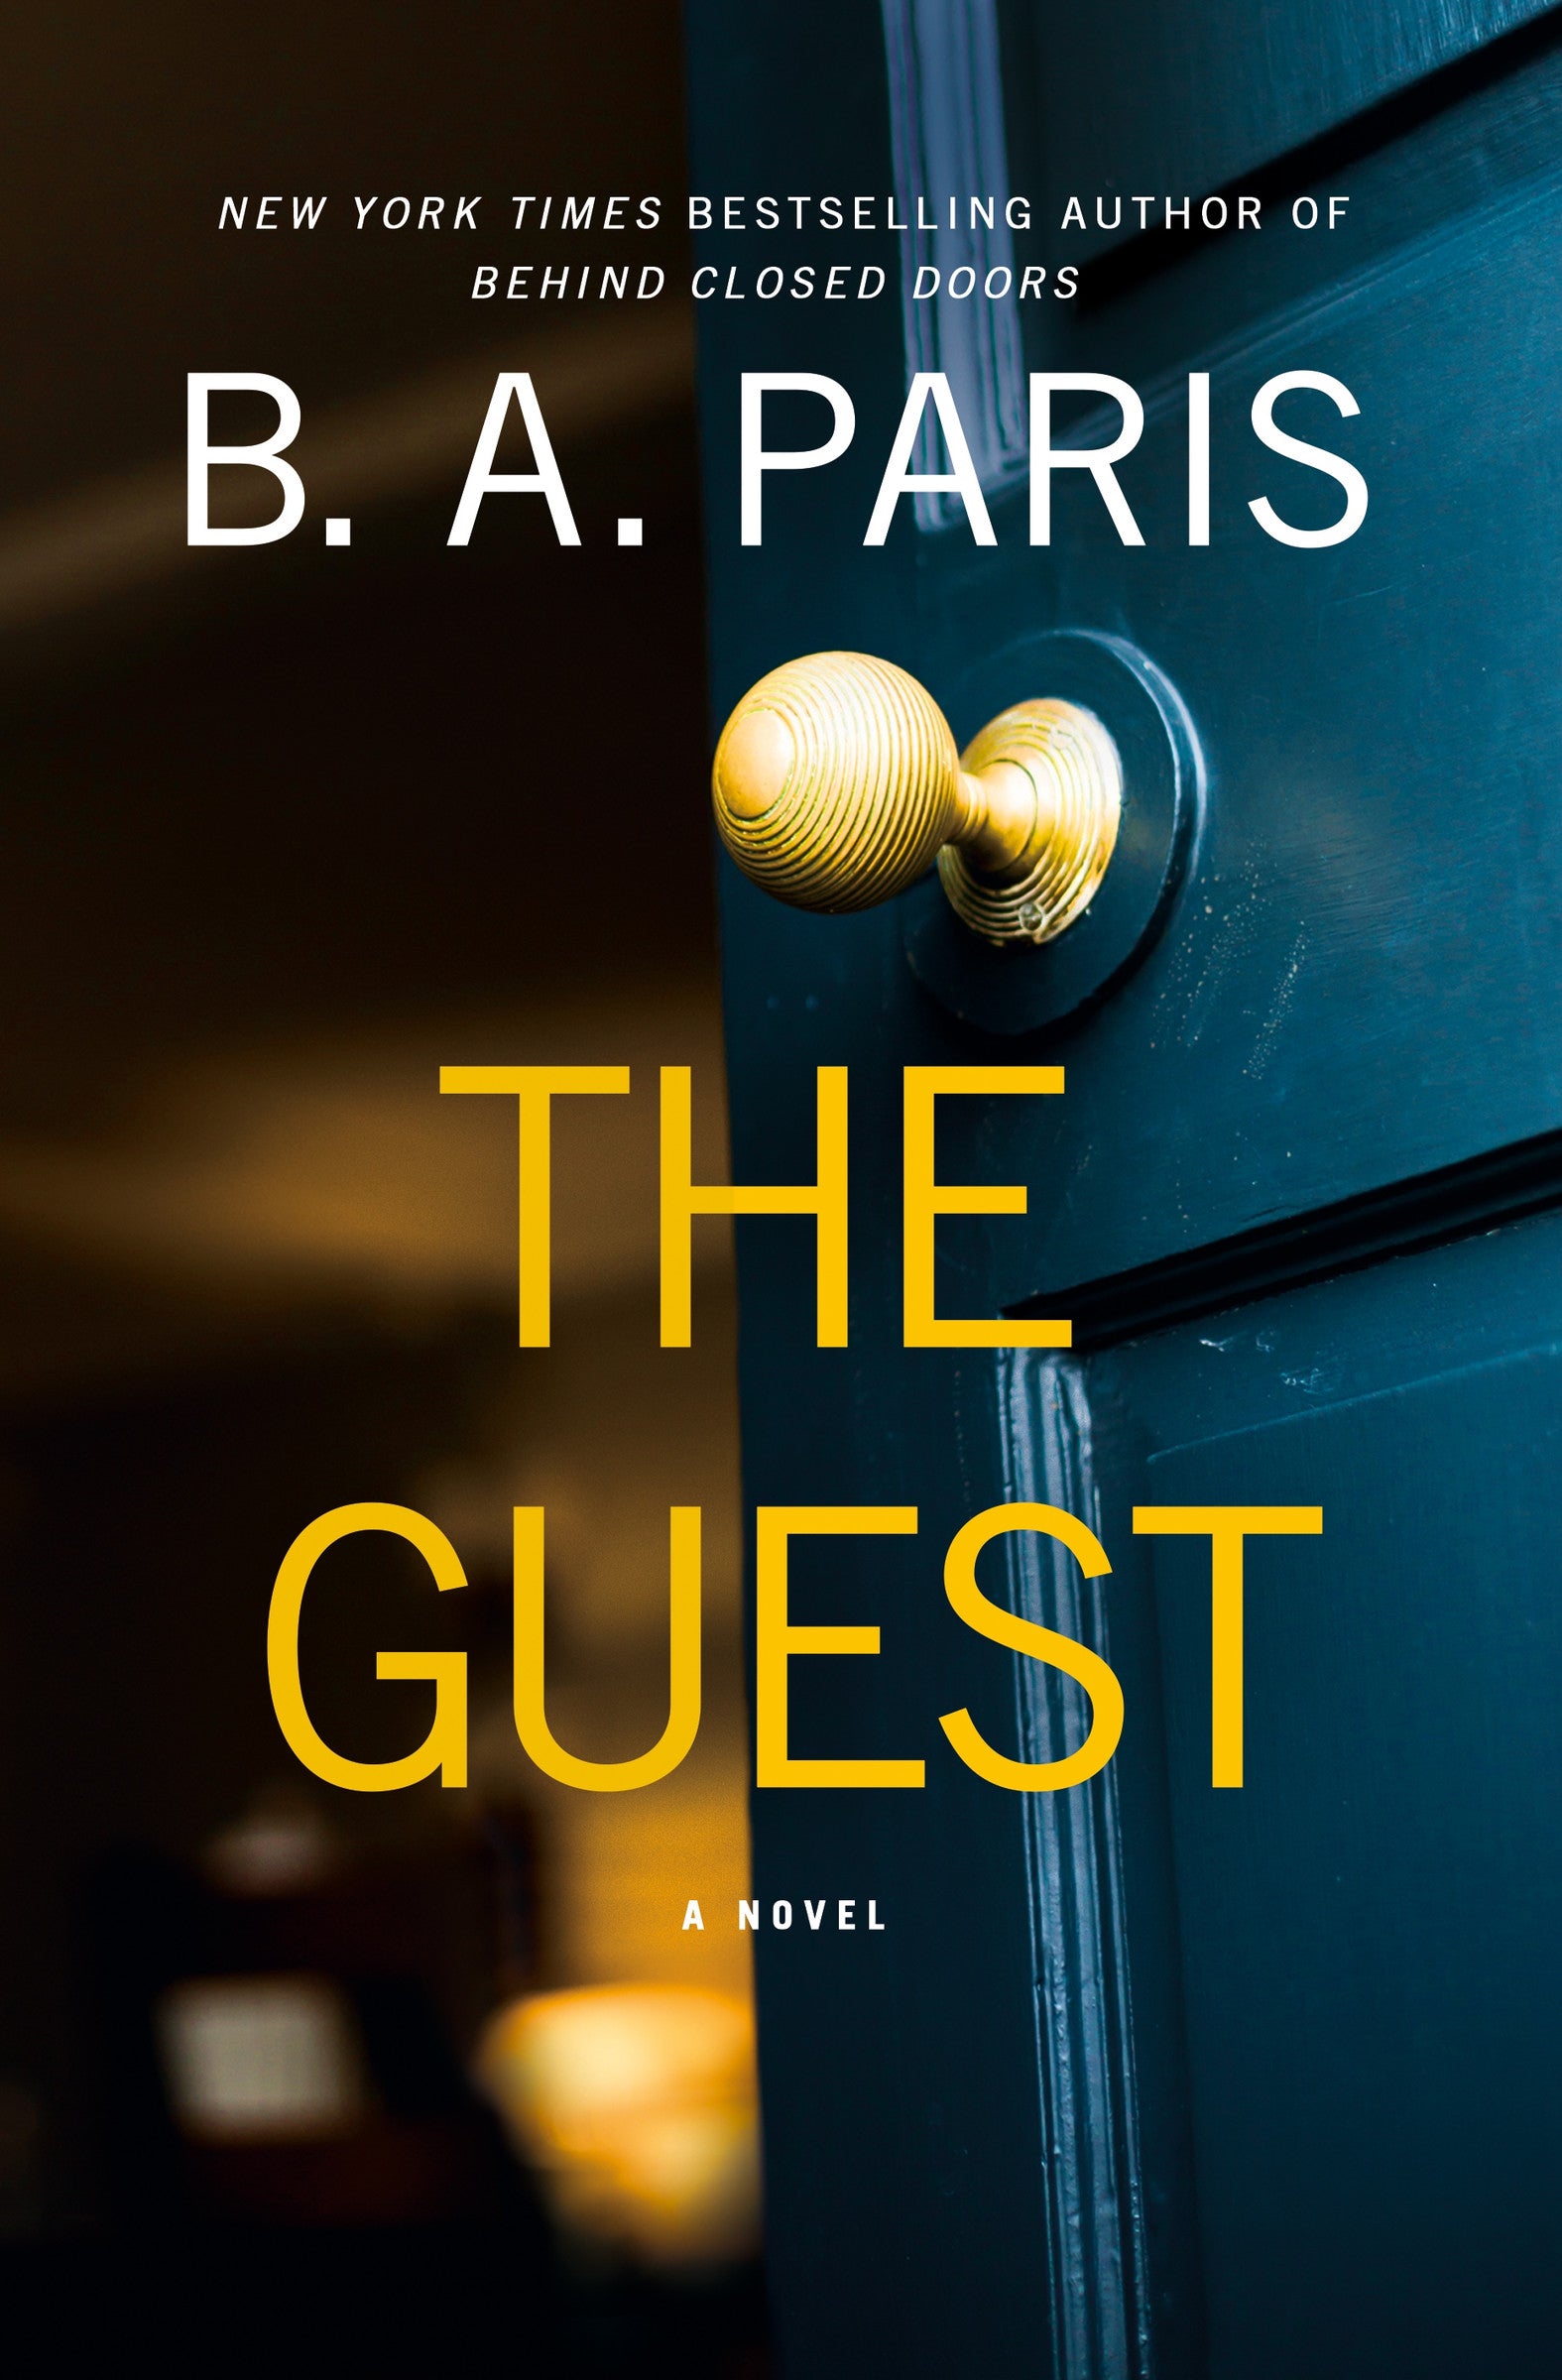 The Christmas Guest – HarperCollins